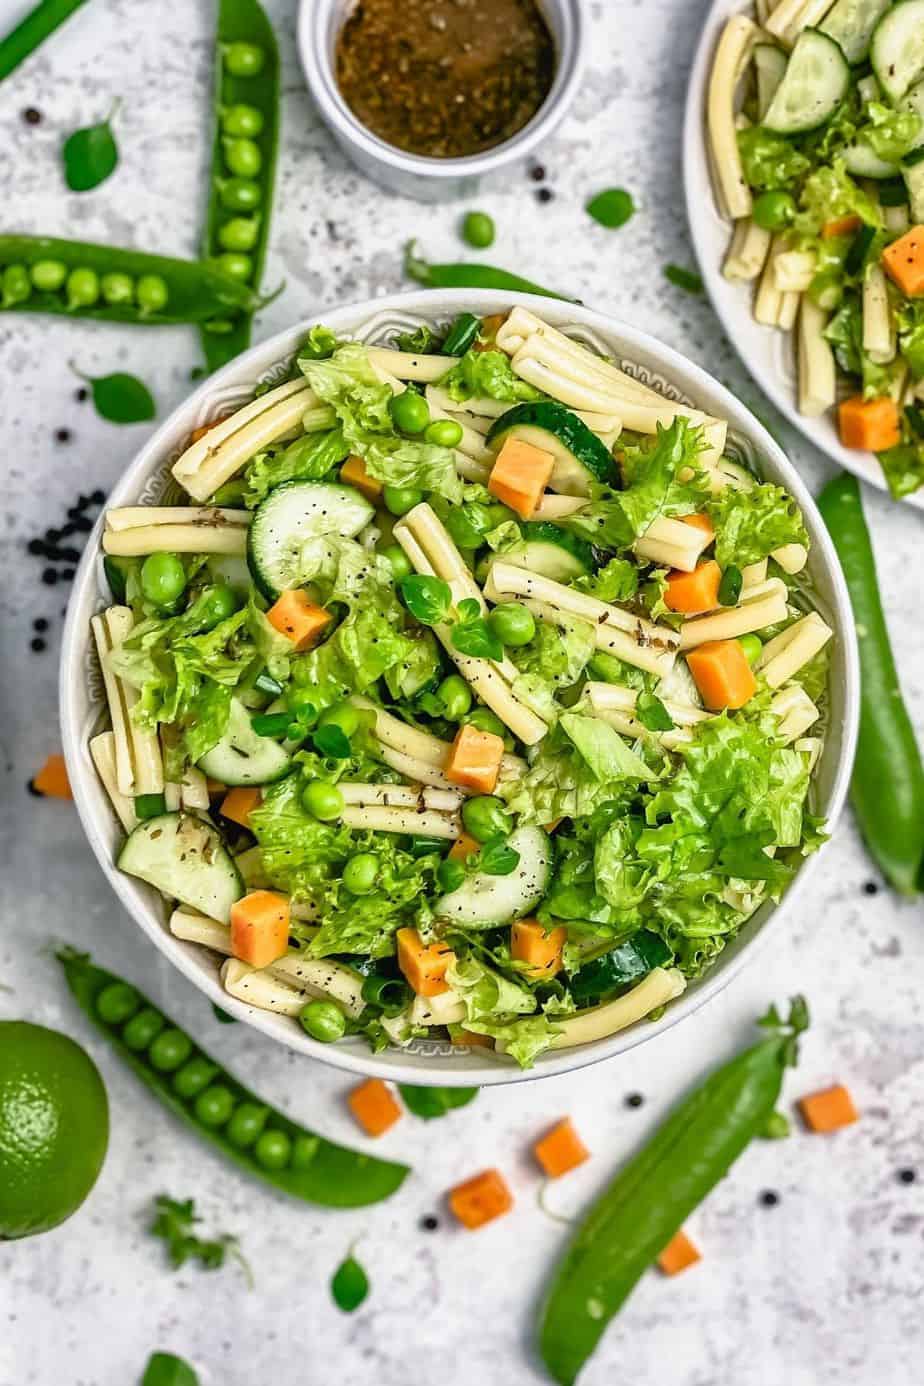 This Pasta Salad Recipe With Cheddar Cheese Cubes is easy to make ahead and is loaded with all the yummy things like peas, lettuce, spring onions, cucumber, and my favorite cheddar cheese. - The Yummy Bowl